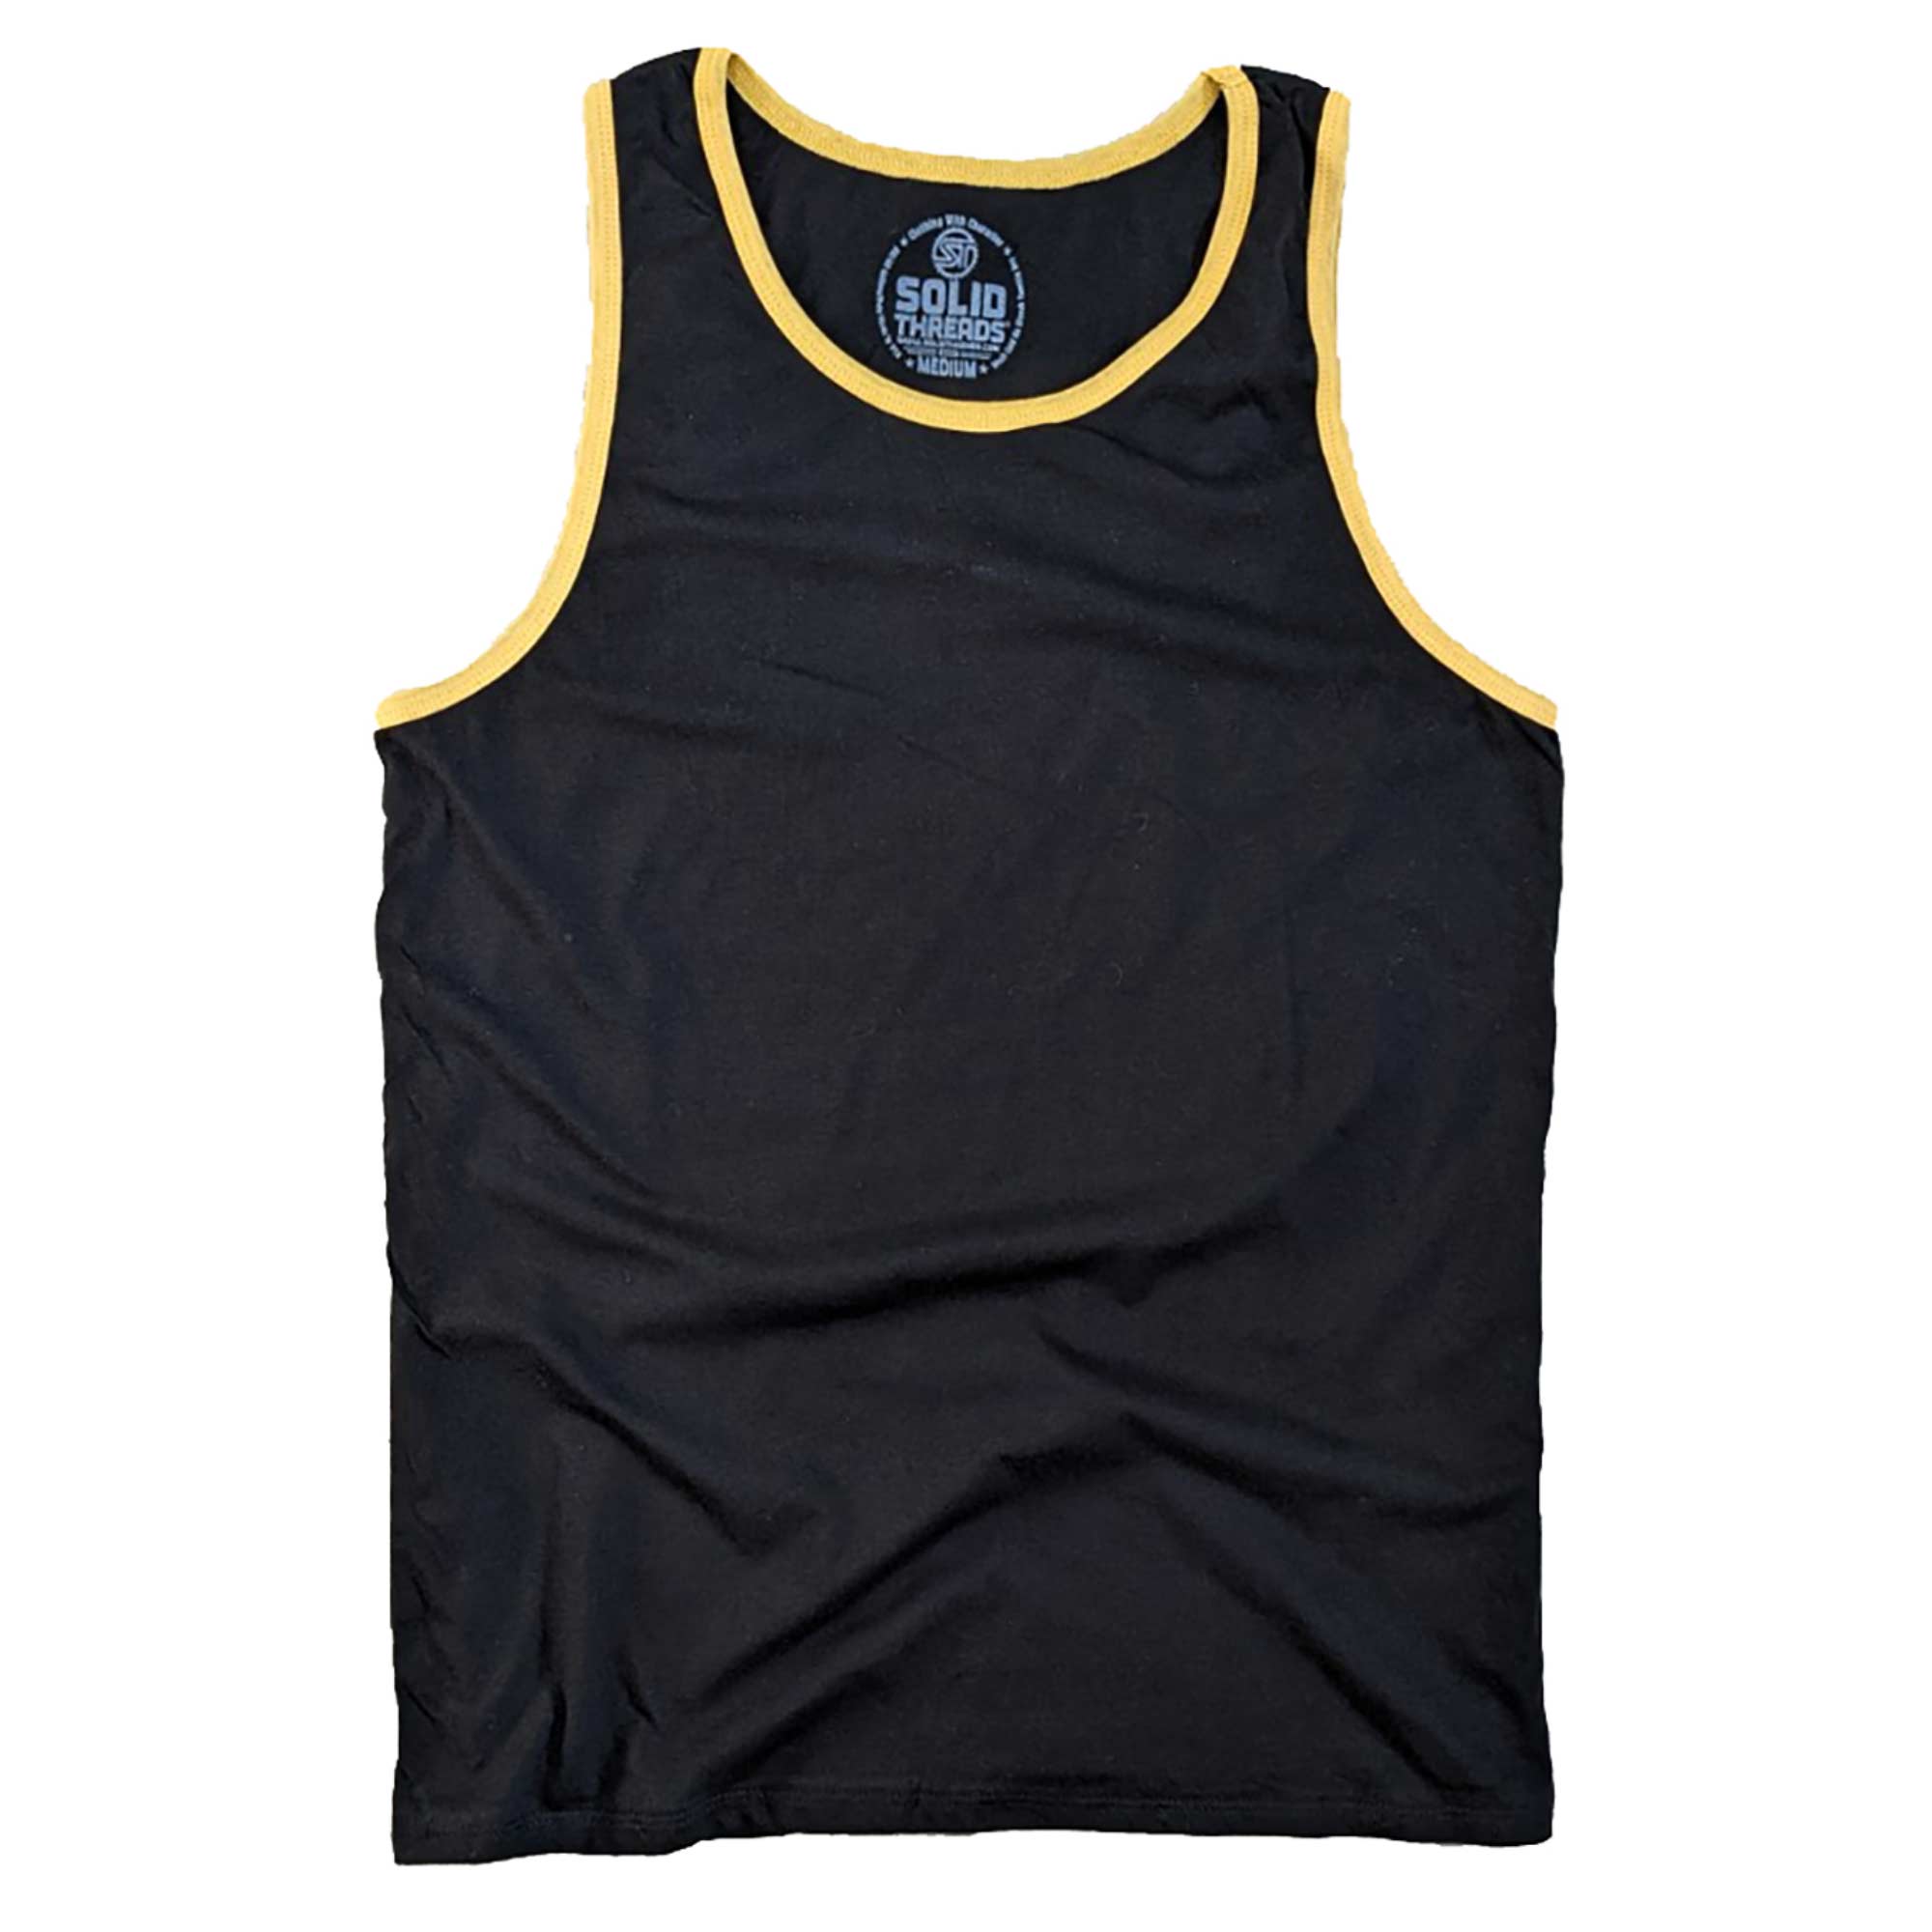 Men's Solid Threads Retro Ringer Tank Top Black/Gold | Vintage Inspired USA Made Tank Top